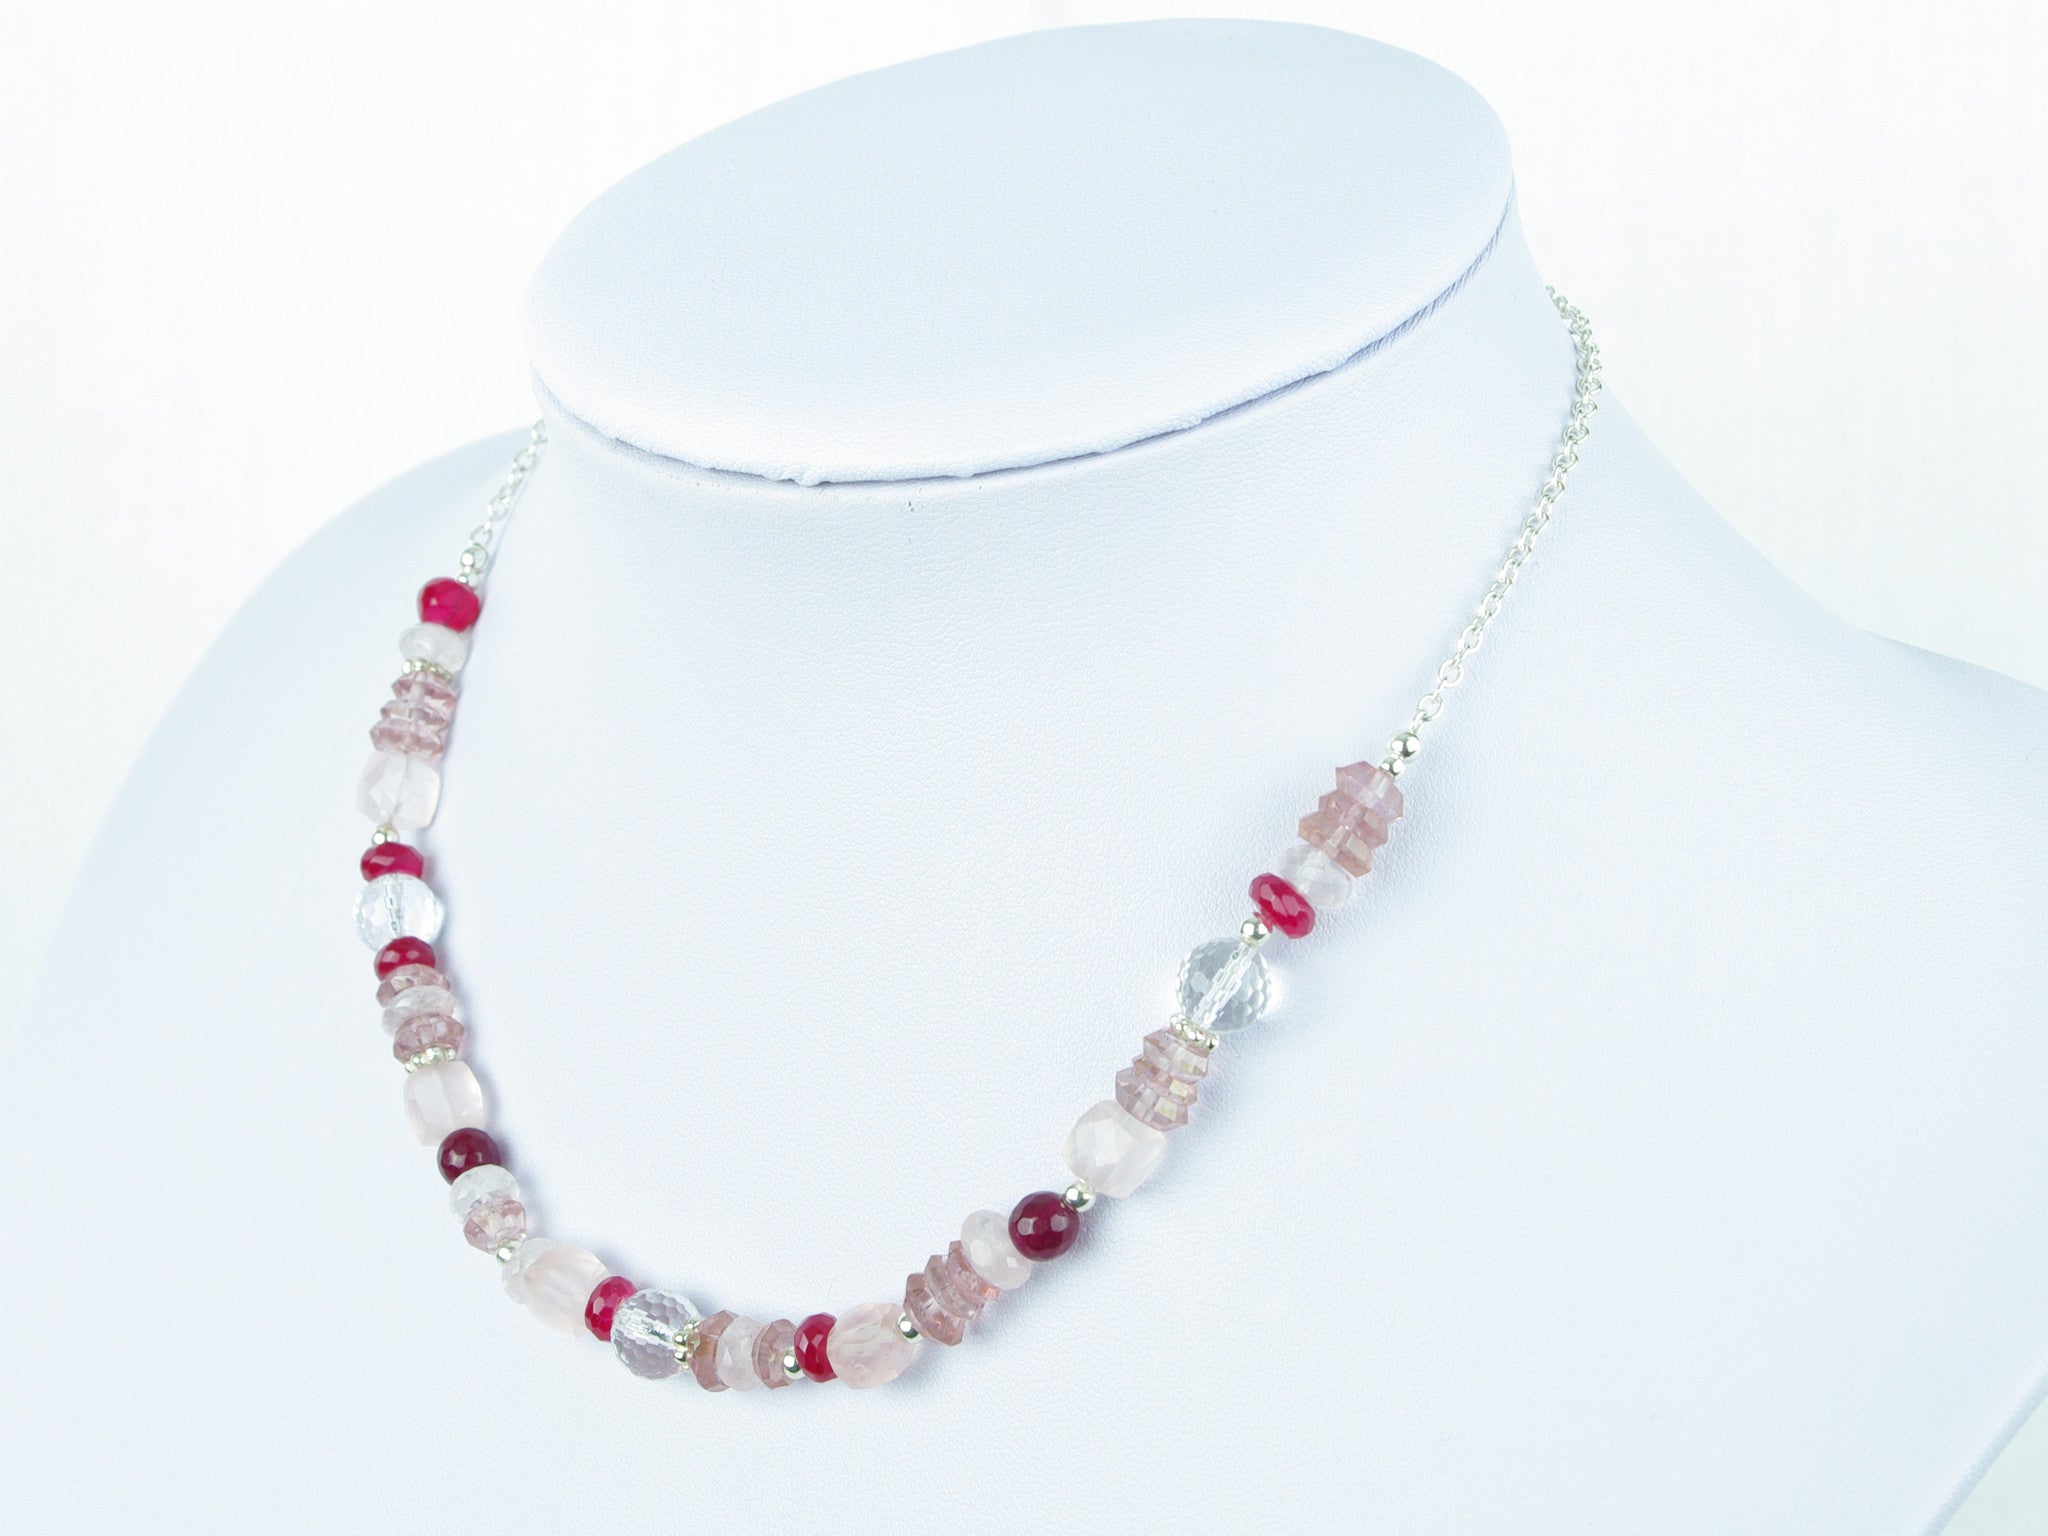 Pretty in Pink Necklace - Quartz & Sterling Silver